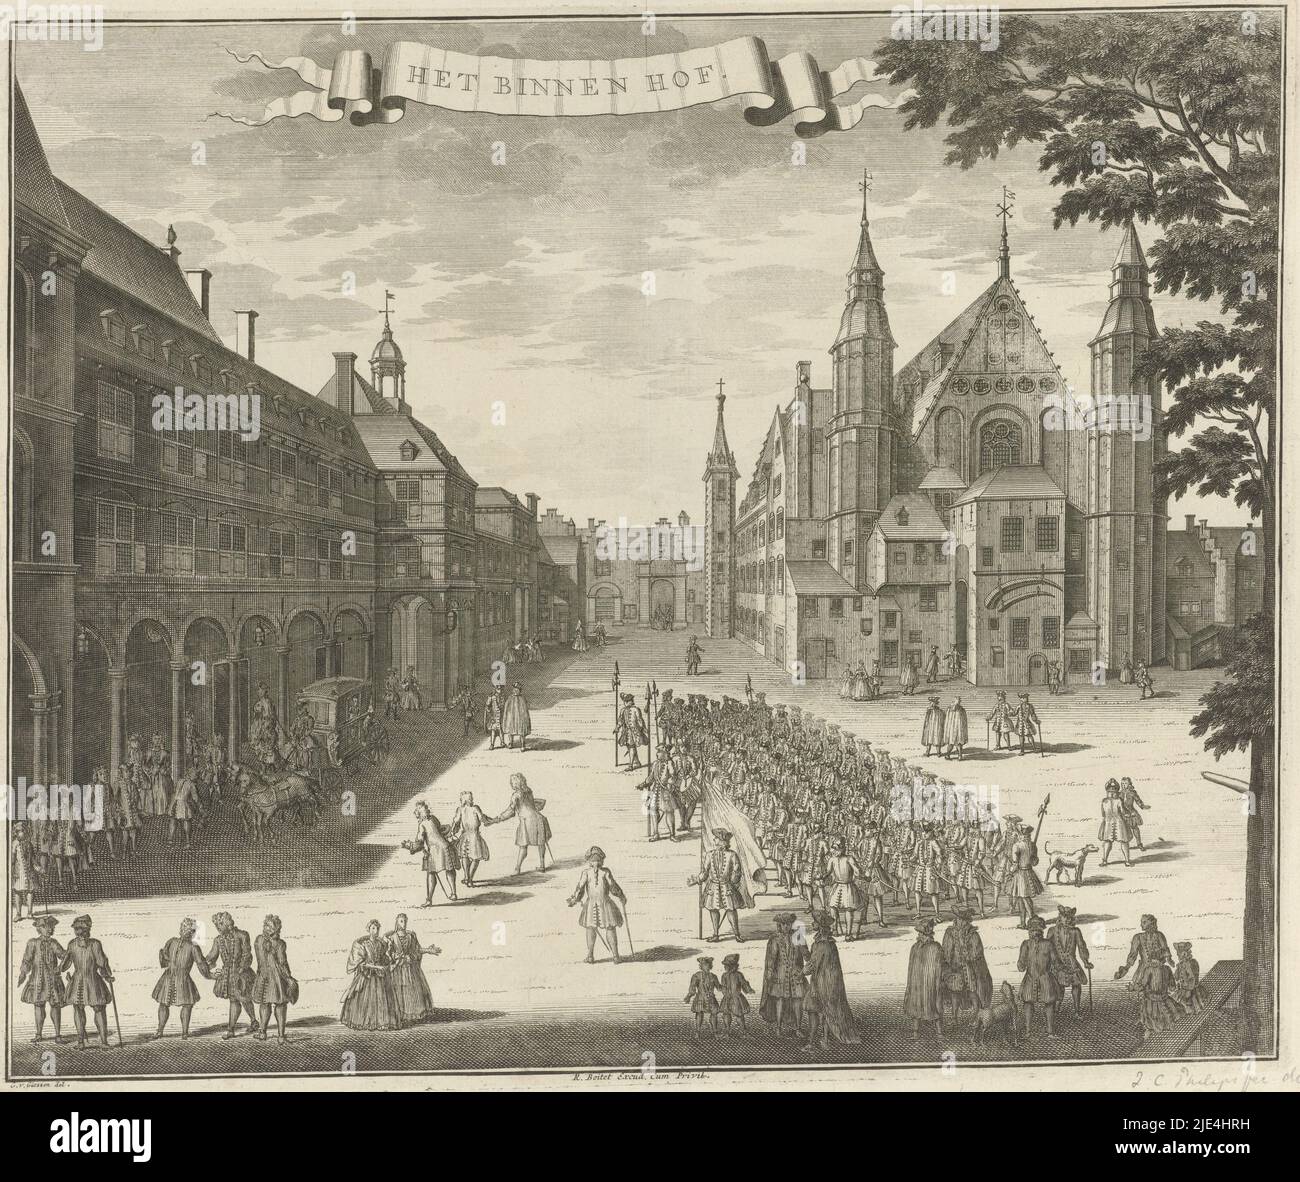 View of the Binnenhof in The Hague, anonymous, after Gerrit van Giessen, 1730 - 1736, View of the Binnenhof in The Hague, with various figures on the square., print maker: anonymous, intermediary draughtsman: Gerrit van Giessen, (mentioned on object), publisher: Reinier Boitet, (mentioned on object), intermediary draughtsman: The Hague, publisher: Delft, publisher: Amsterdam, 1730 - 1736, paper, etching, engraving, h 286 mm × w 342 mm Stock Photo